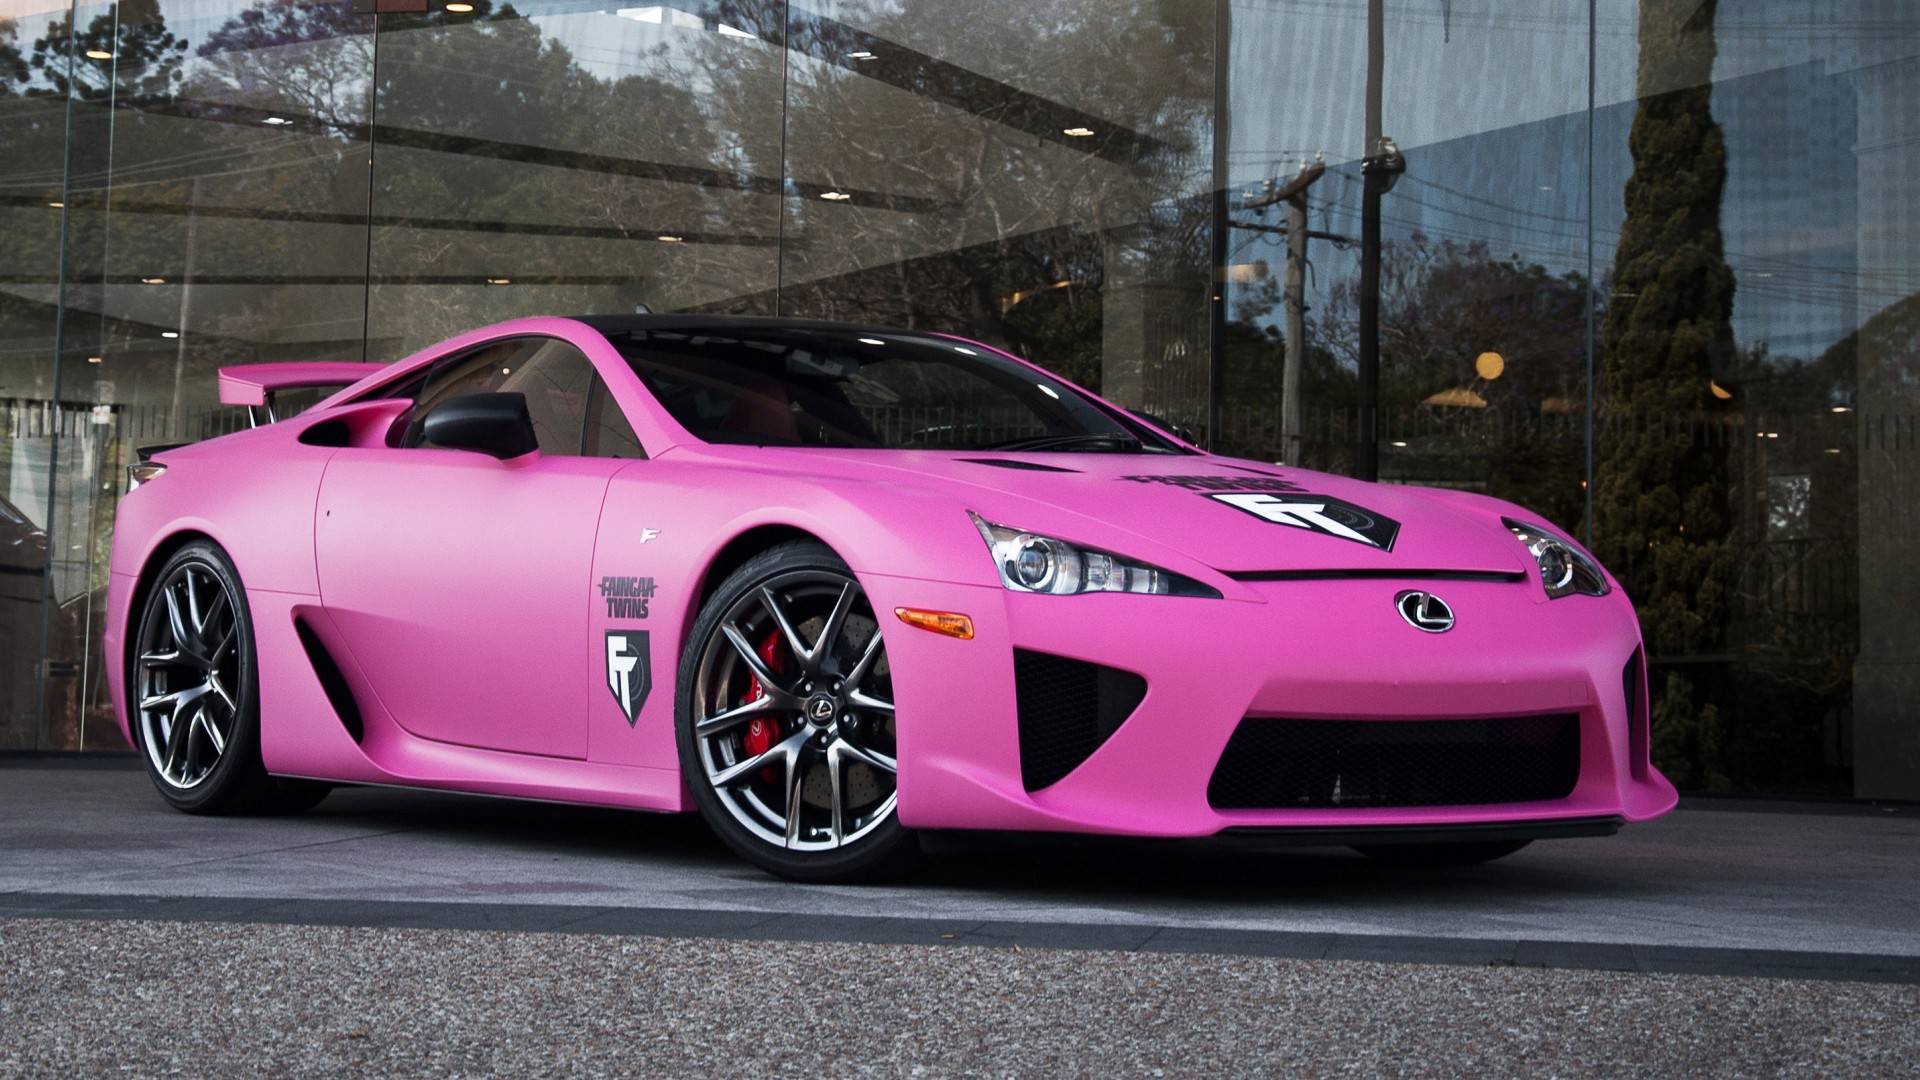 Pink Car Photos Download The BEST Free Pink Car Stock Photos  HD Images